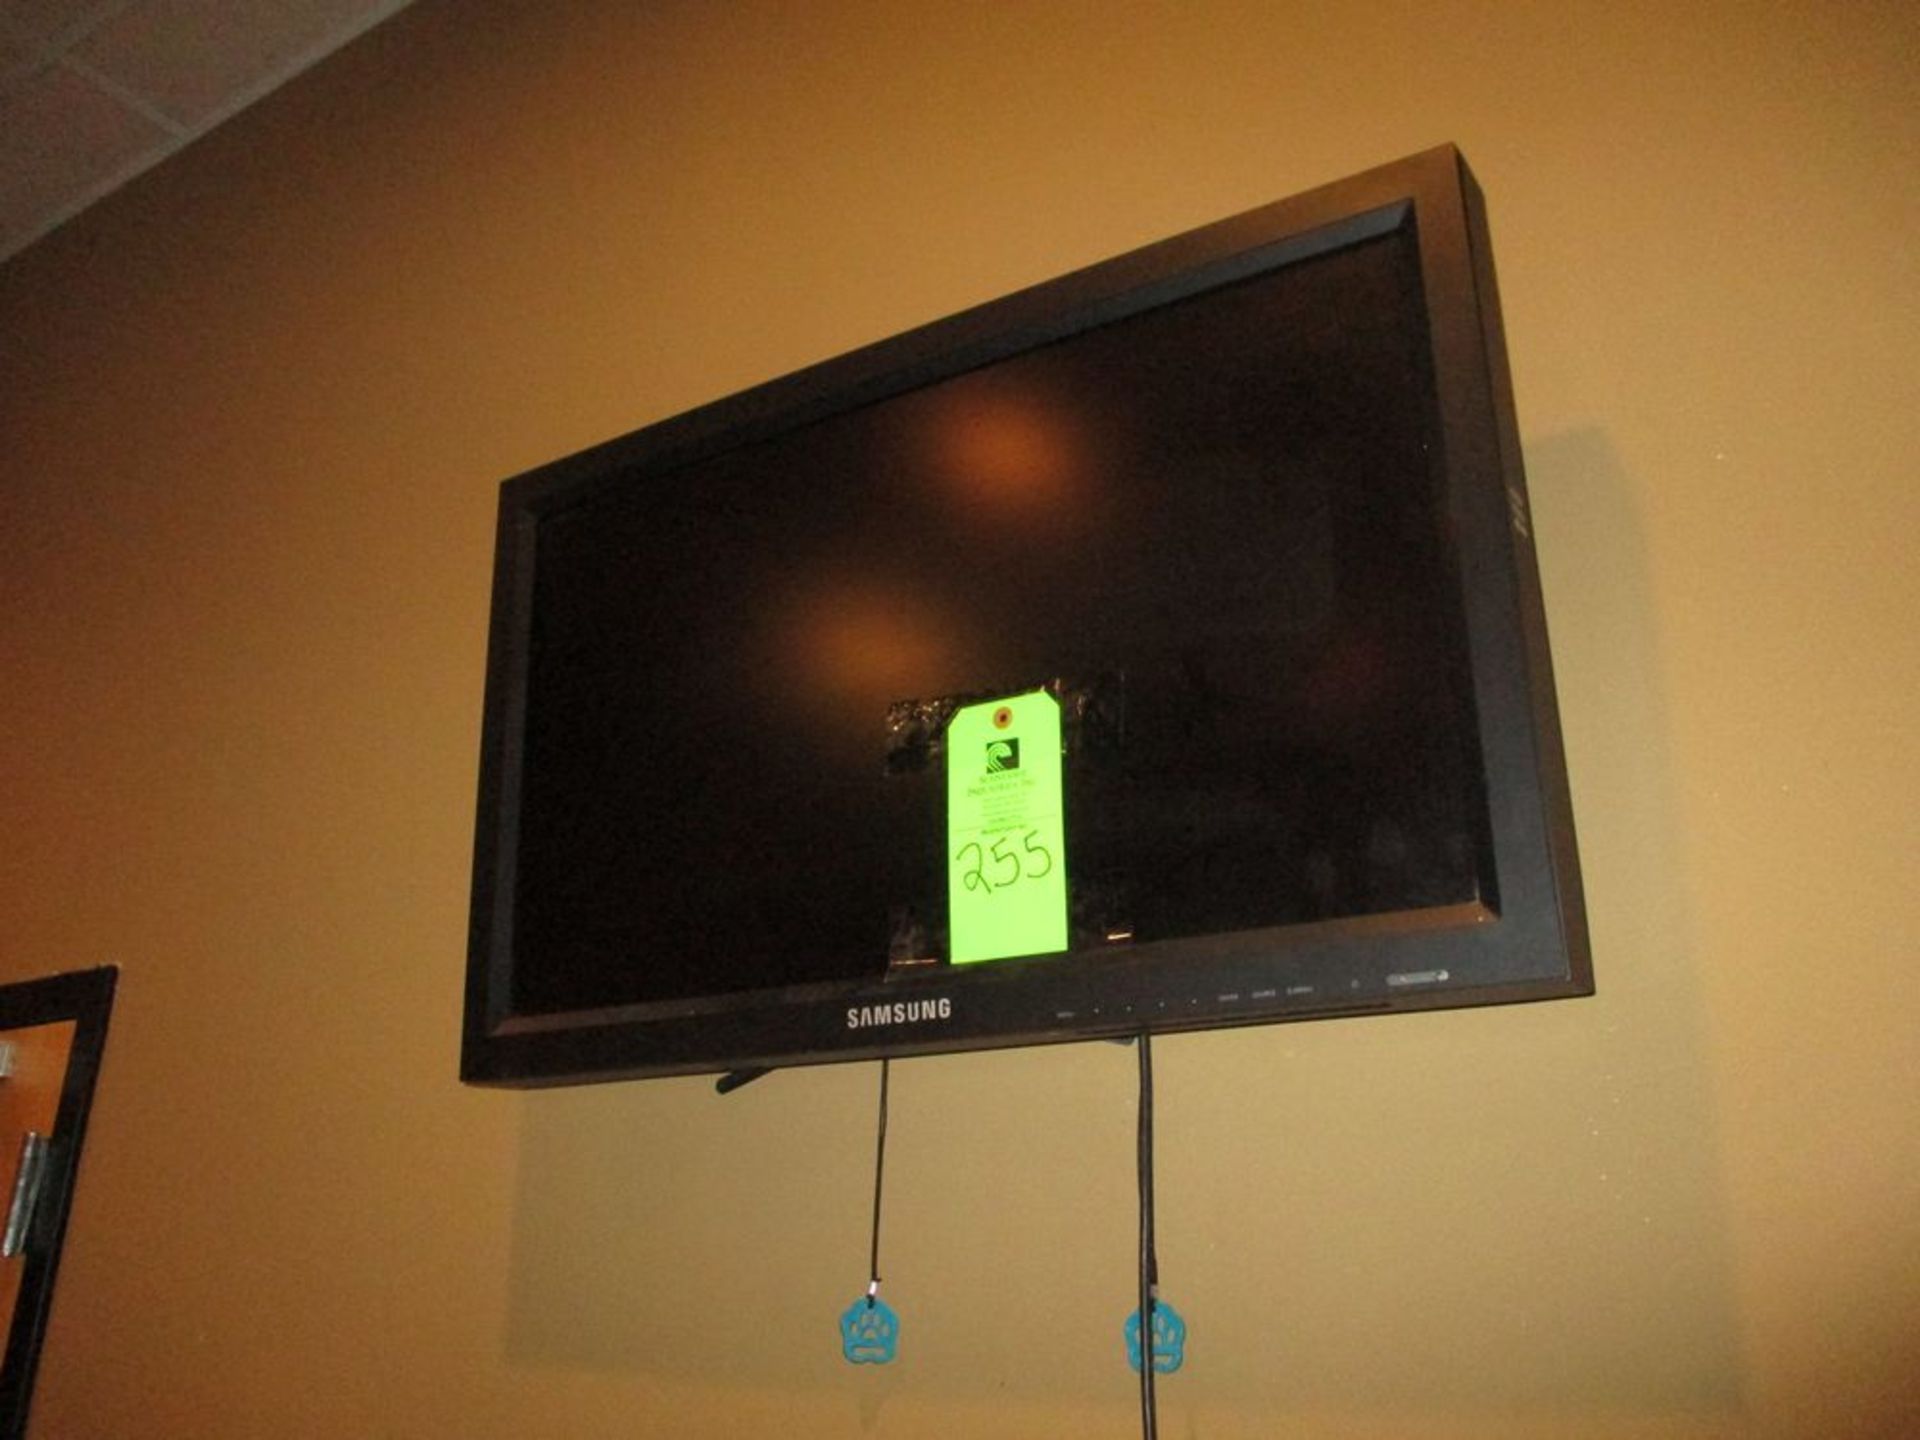 Samsung flat screen TV, 16.5 in x 27.5 in ***Auctioneer Note*** -- $50 Removal & Loading Fee will be